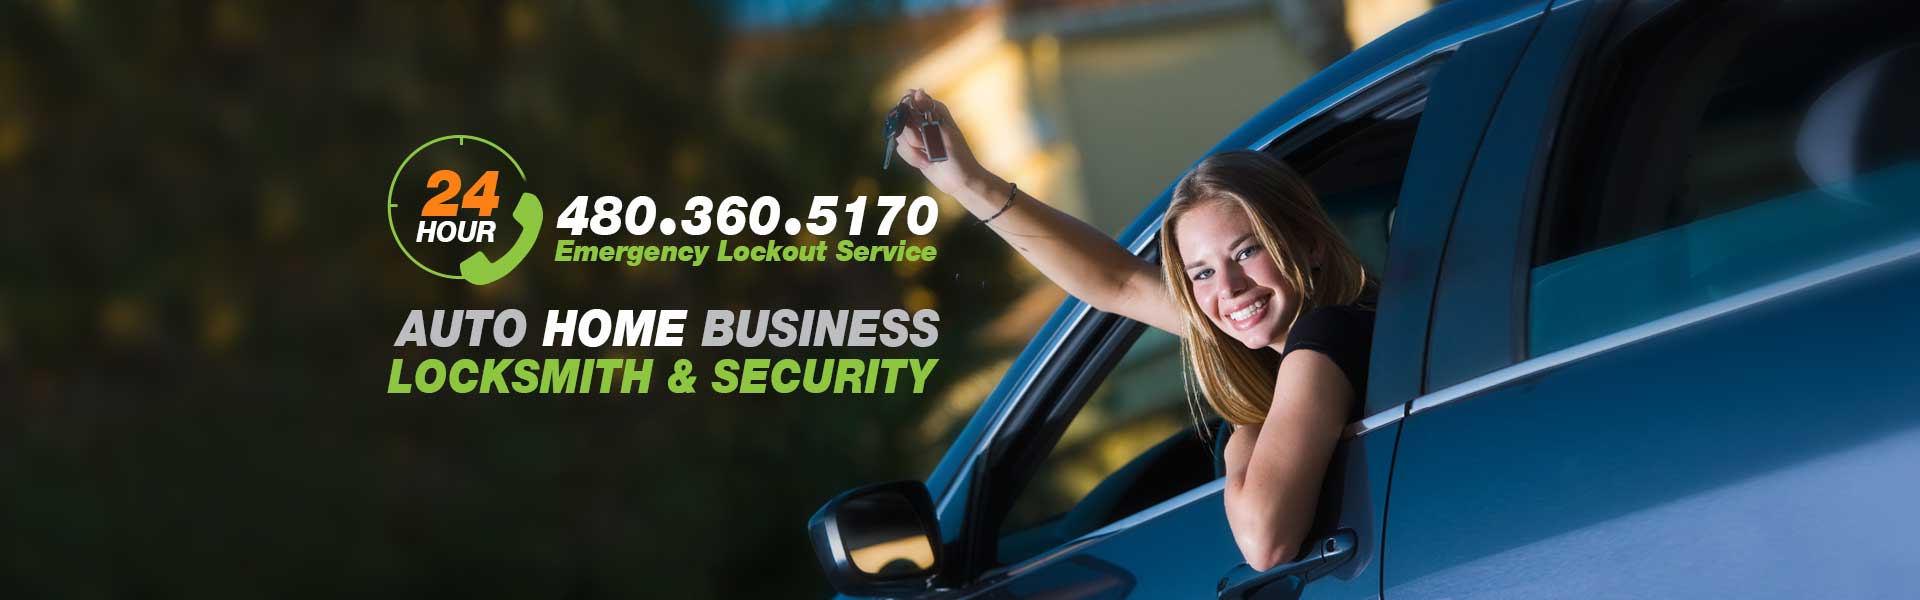 <p>Mesa Pro Locksmith is a promotion company for locksmith, security, and home automation services. 24/7 Pro Locksmith, LLC is a locksmith and alarm company. All jobs are performed by technicians who are independent contractors. Phone 480.360.5170 Email contact@mesaprolocksmith.local-service-providers.com Location 2625 N. 24th Street. #20 Mesa, AZ 85213</p>
